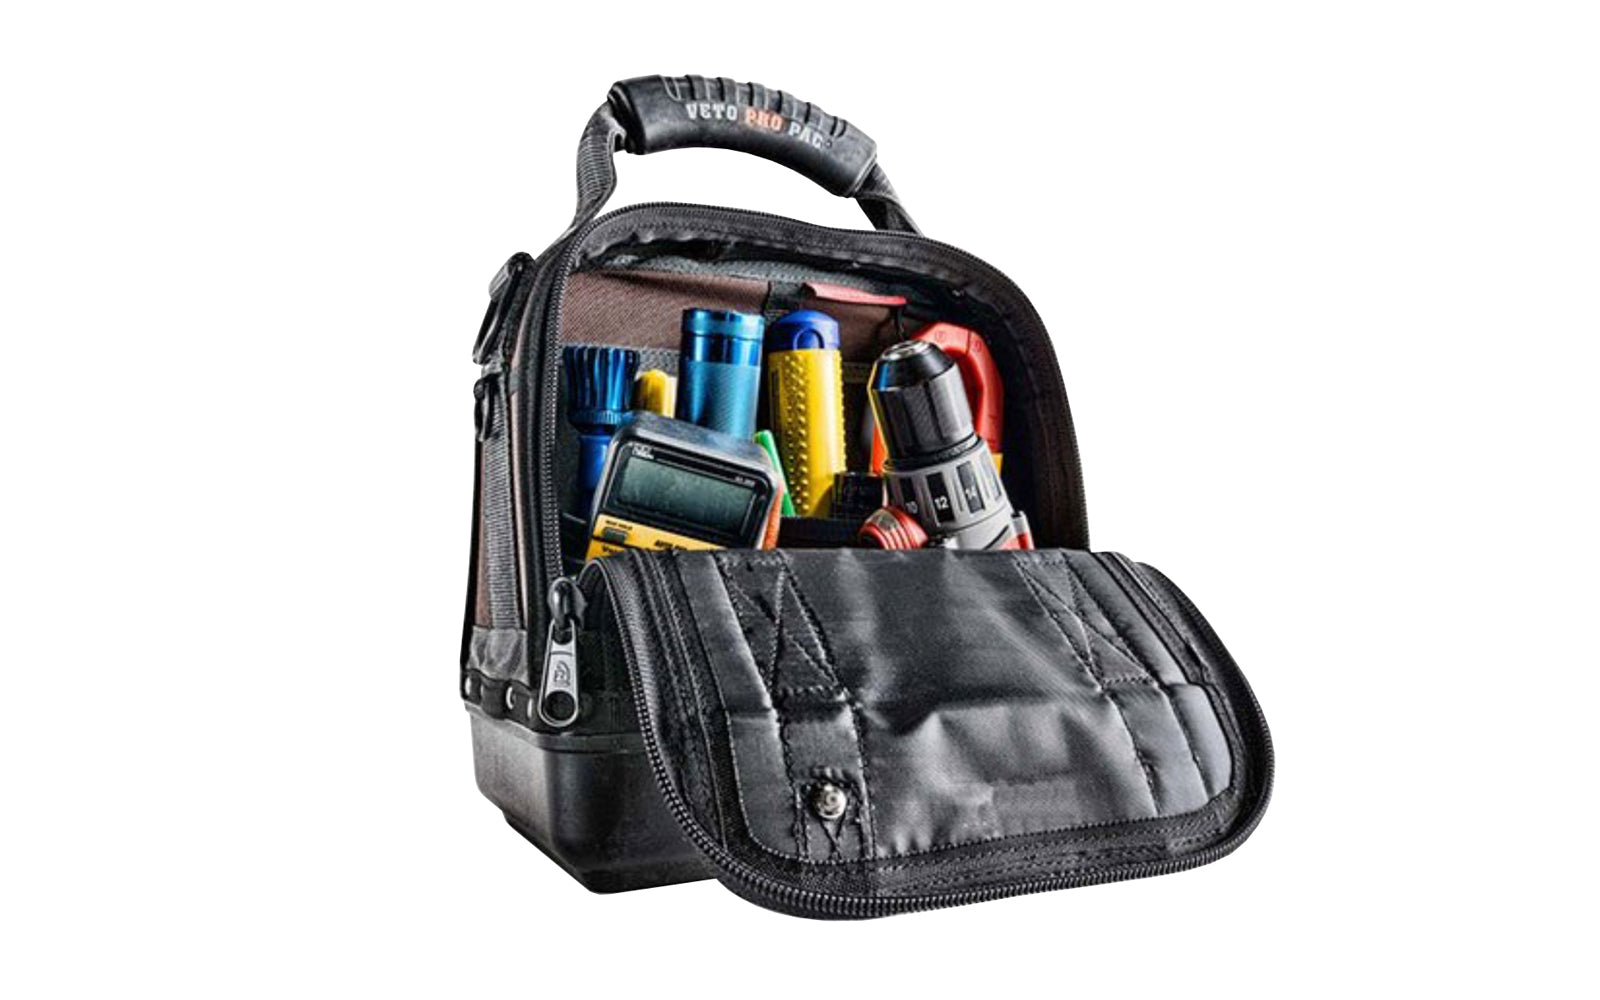 Veto Bags - Veto Pro Pac MC - 20 interior & exterior pockets - Compact storage bag with zipper - Waterproof thick polypropylene base - shoulder strap - 851578000424 - Model MC - tool storage - 10" Long x  8" Wide x  12" High - 3 large pockets for meters & large tools - Model MC - troubleshooting, diagnostics bag - Veto